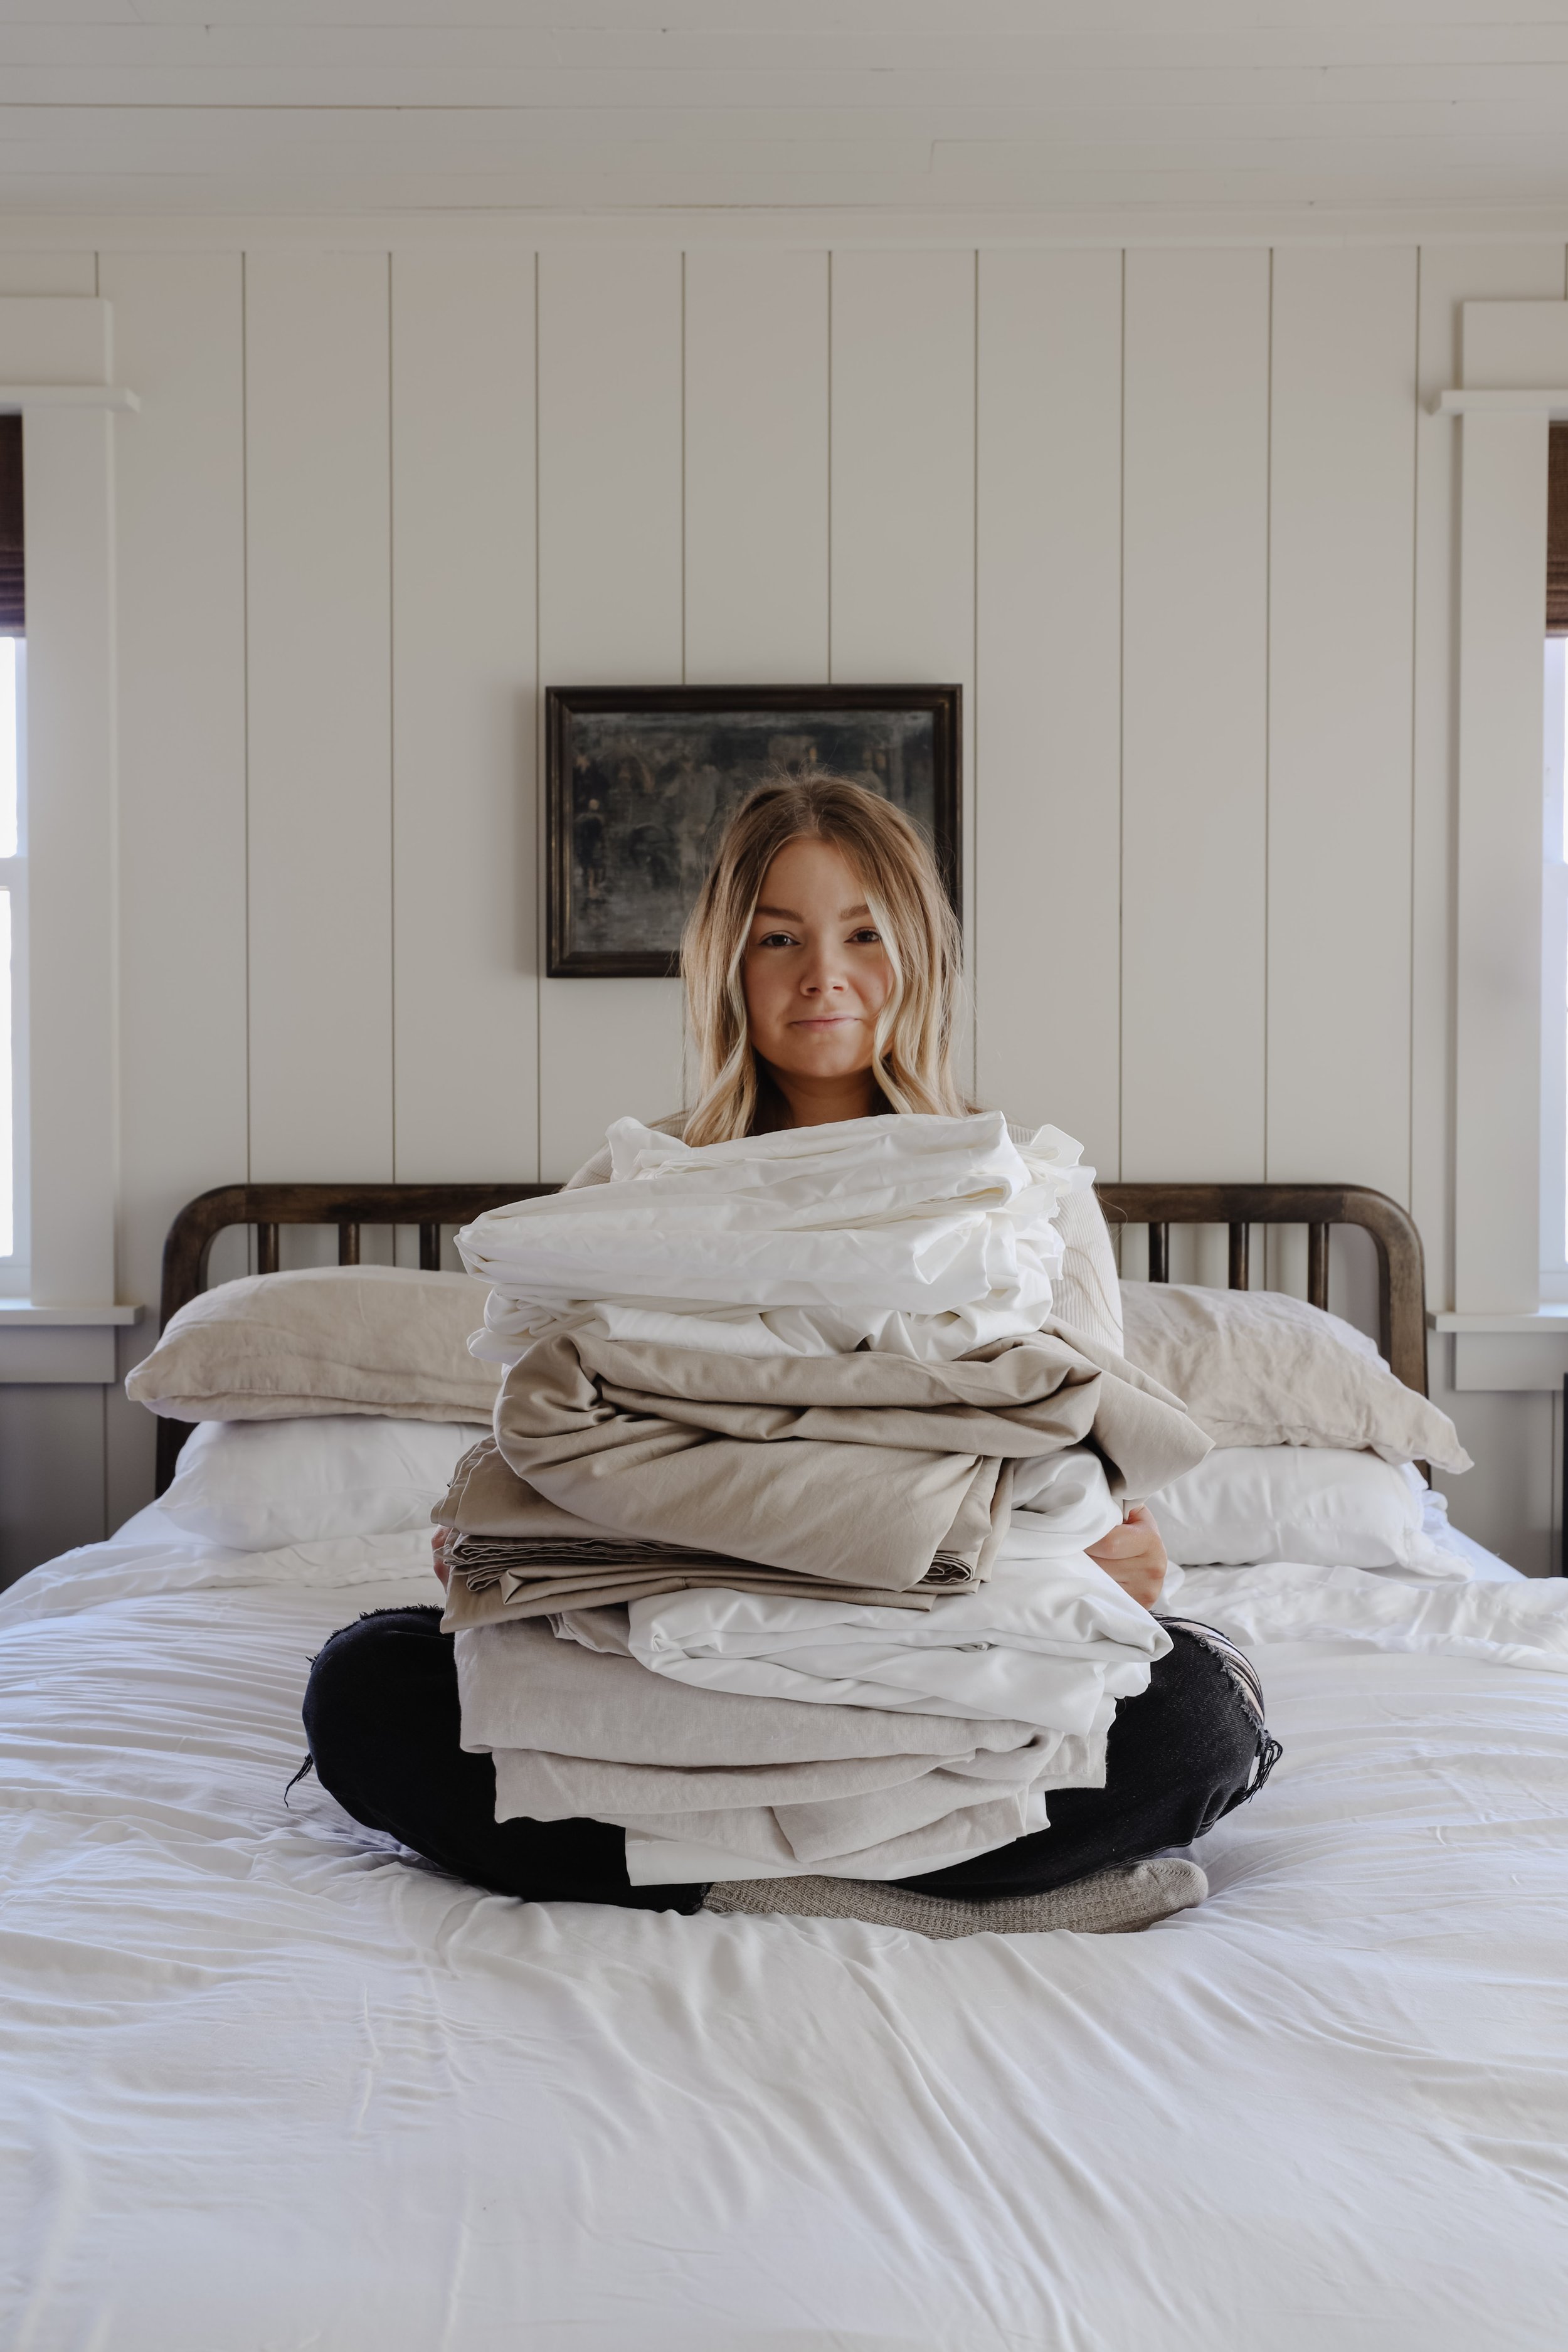 I tested sheets from the 4 most popular bedding brands - here's my favorite. Honest review of Boll & Branch, Brooklinen, Cozy Earth, and Quince sheets. How to pick the right sheet fabric for you. The best sheets for hot sleepers and cold sleepers.